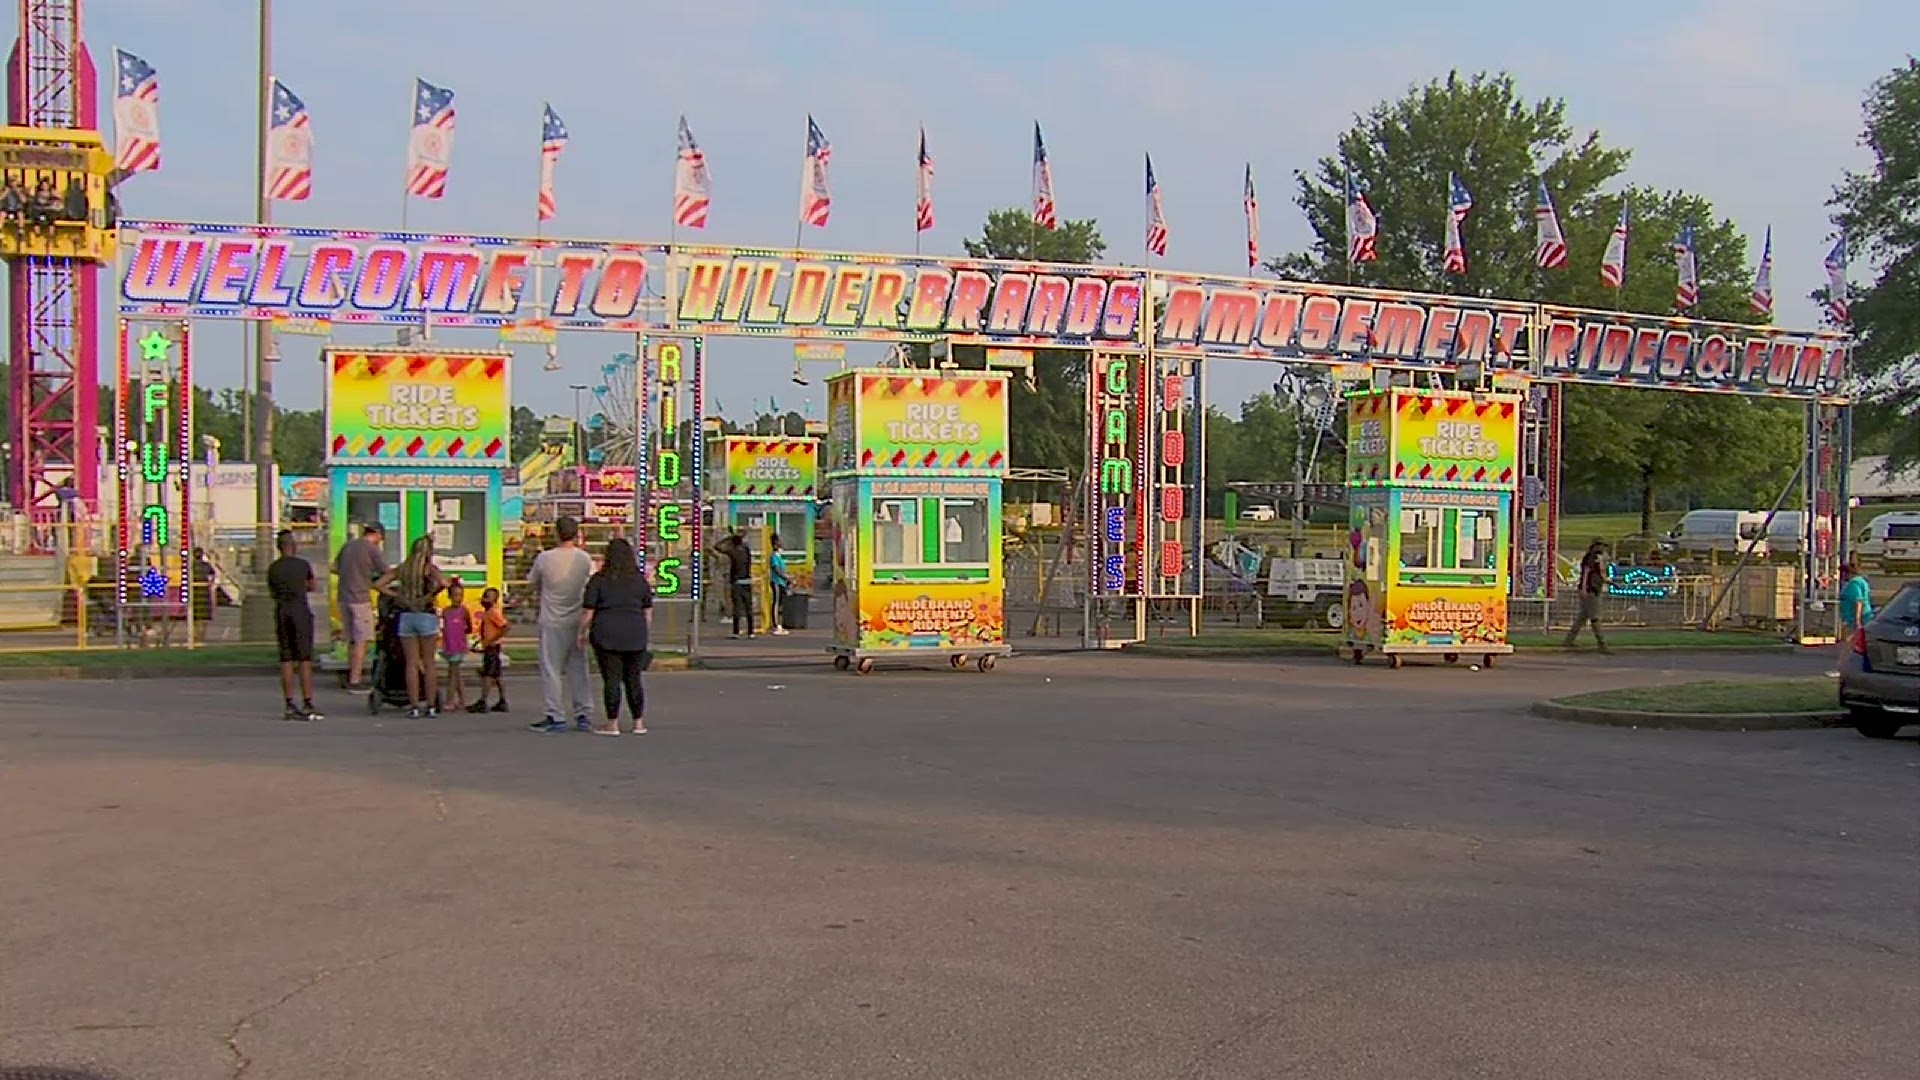 The event features carnival rides, shows, attractions, games, and --of course-- your favorite fair food menu items.